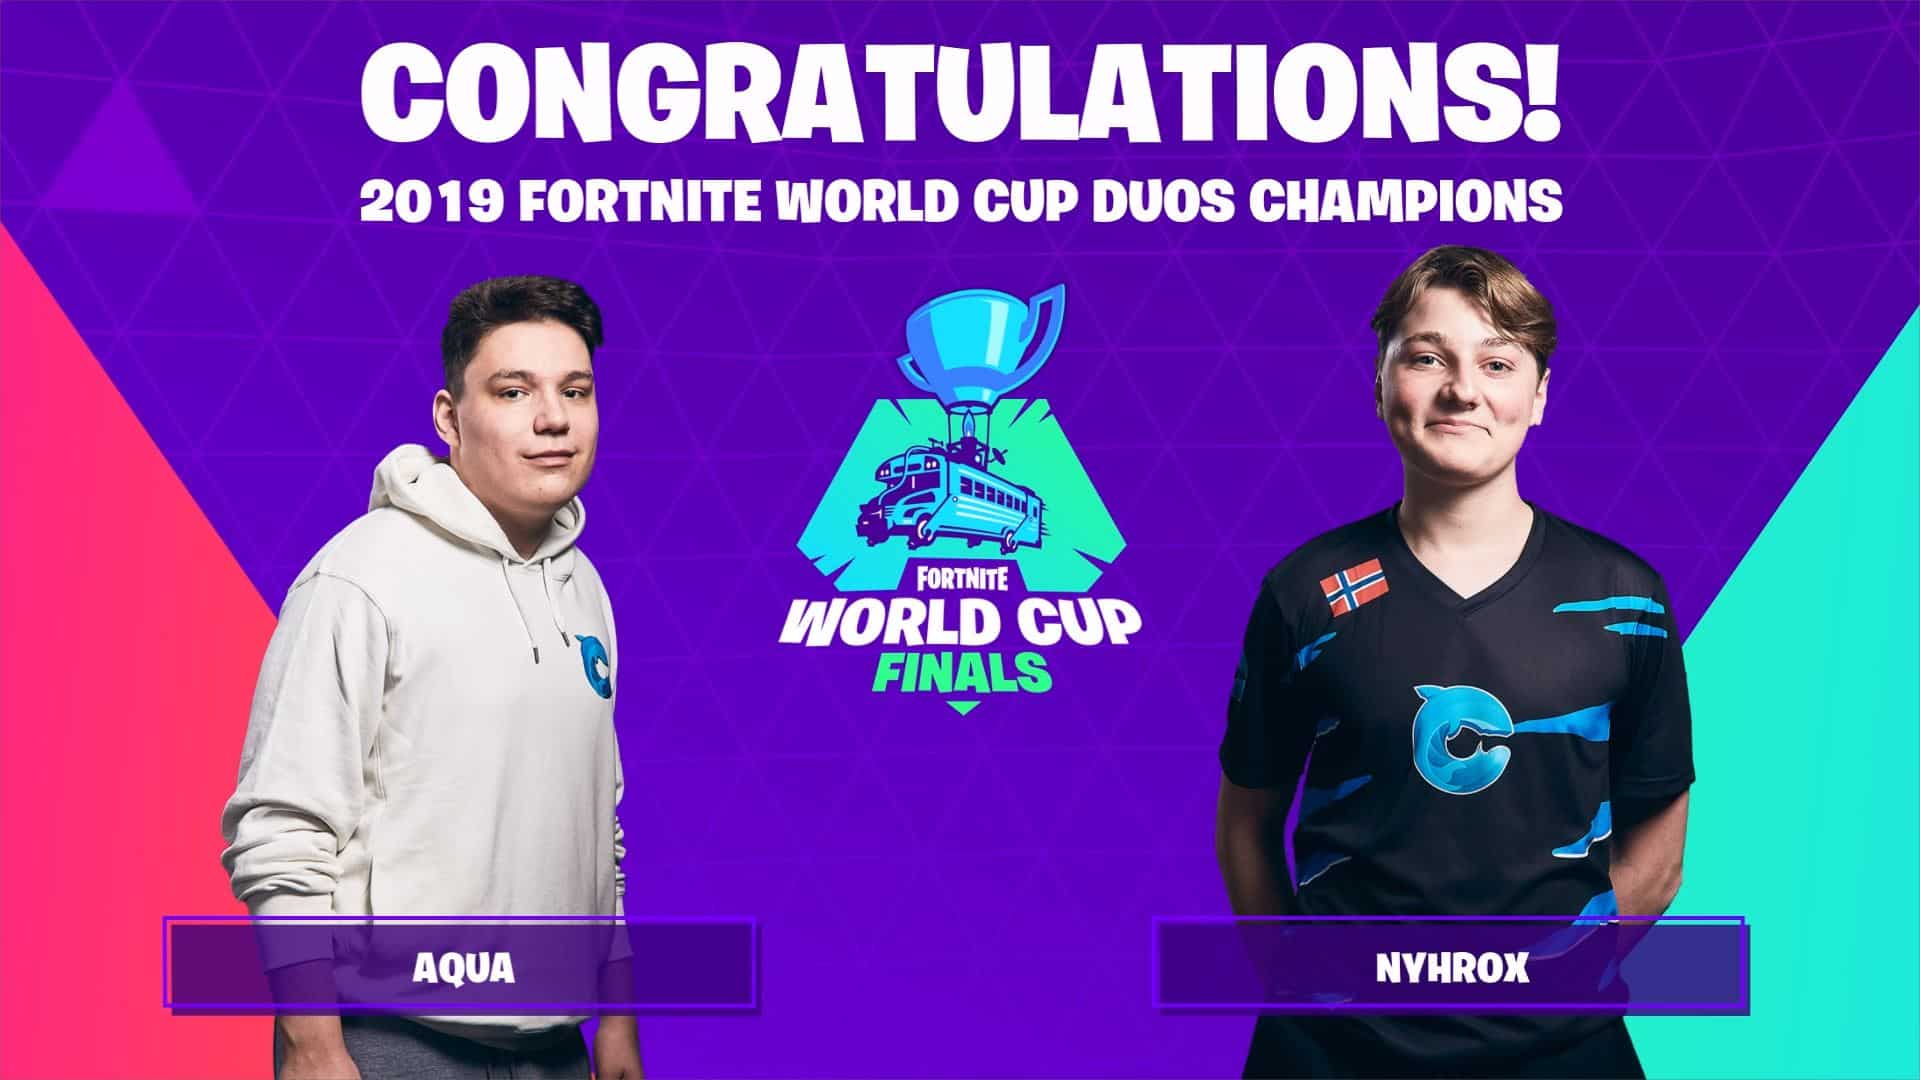 Nyhrox And Aqua Are The Fortnite World Cup Duo Champions